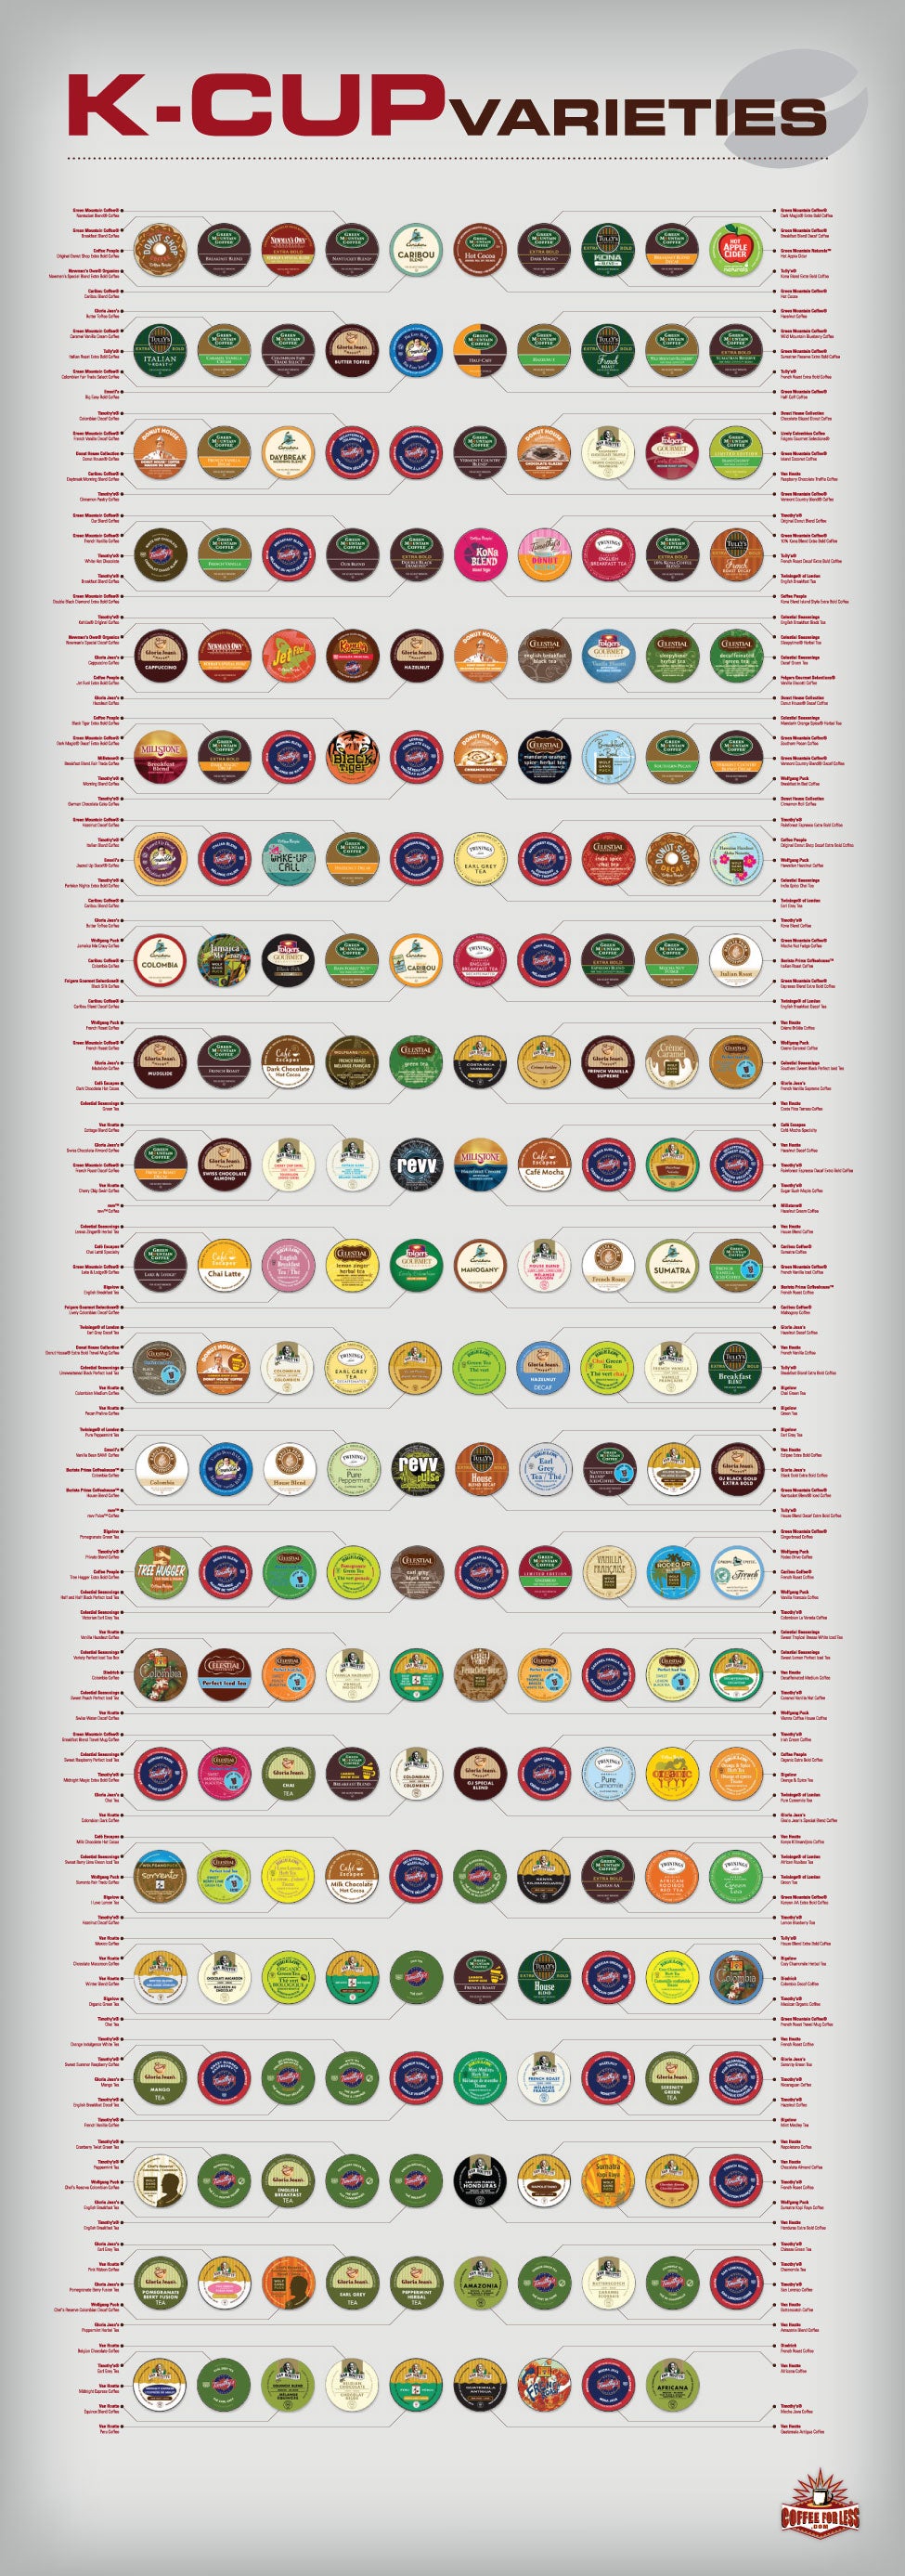 Curious about the broad spectrum of flavors and varieties available to Keurig K-Cup users? Take a look at this chart!